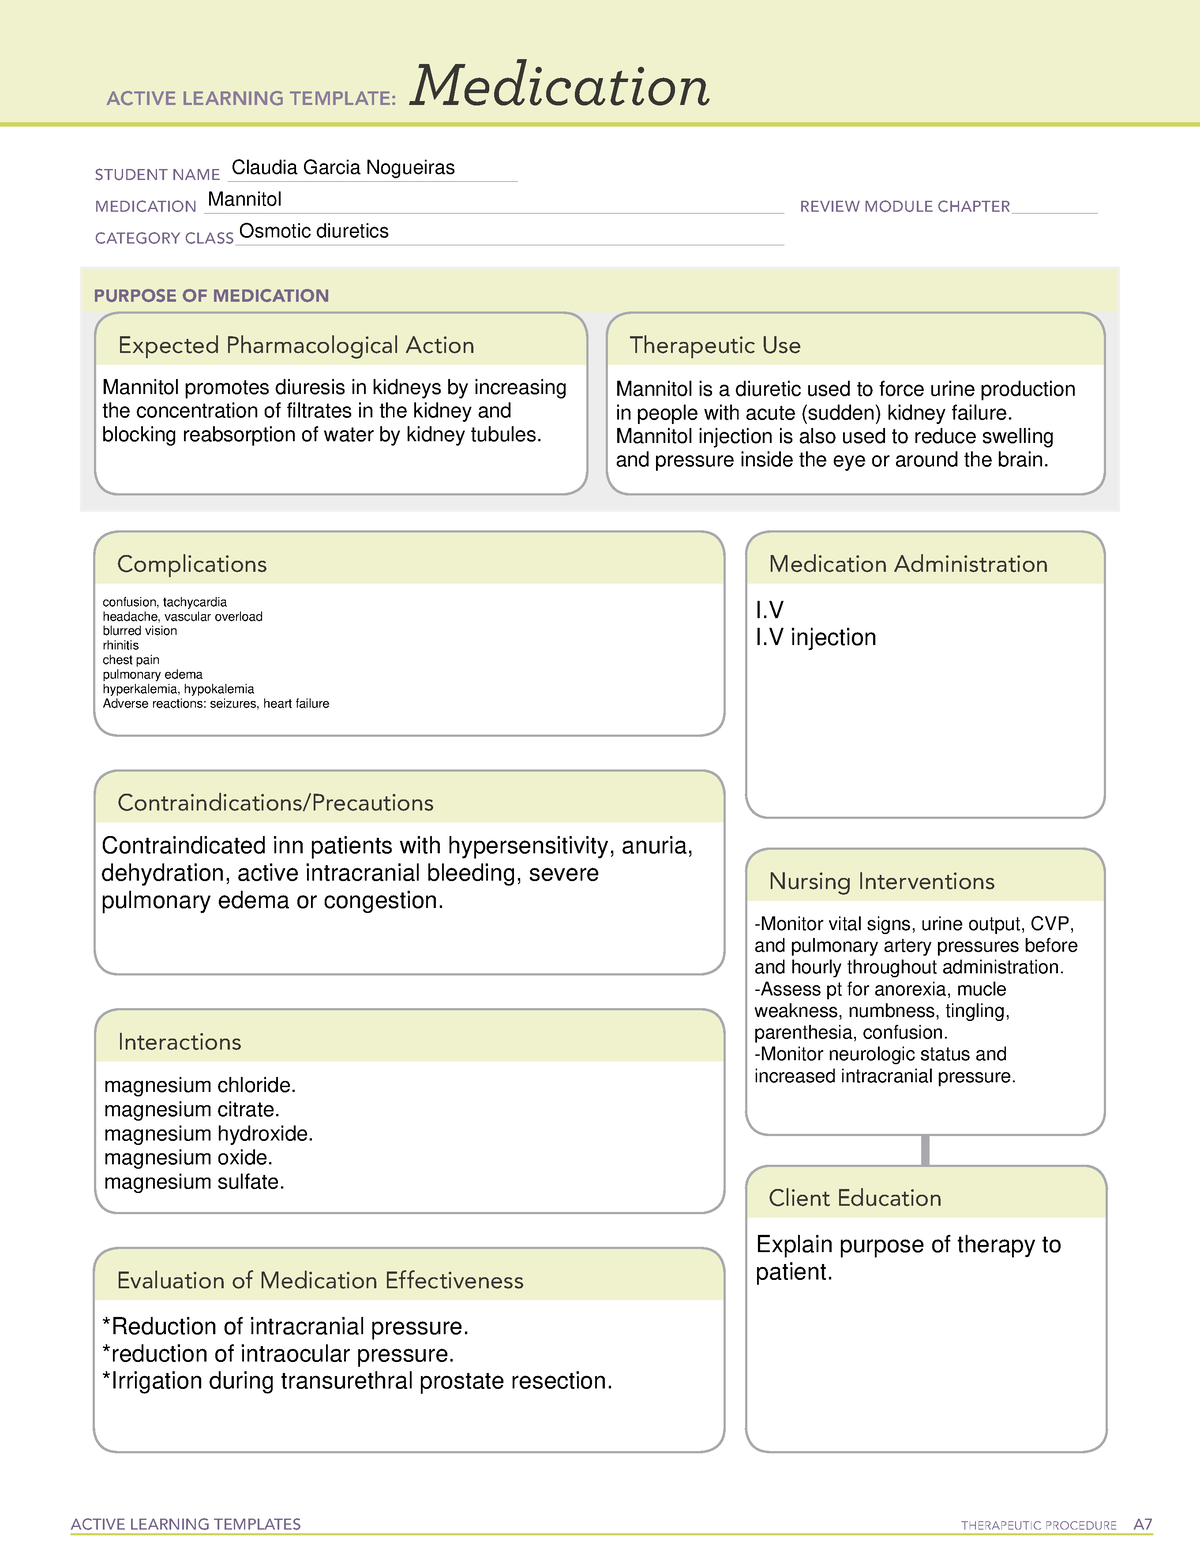 Osmotic diuretics Medication templates Reproductive and Urinary